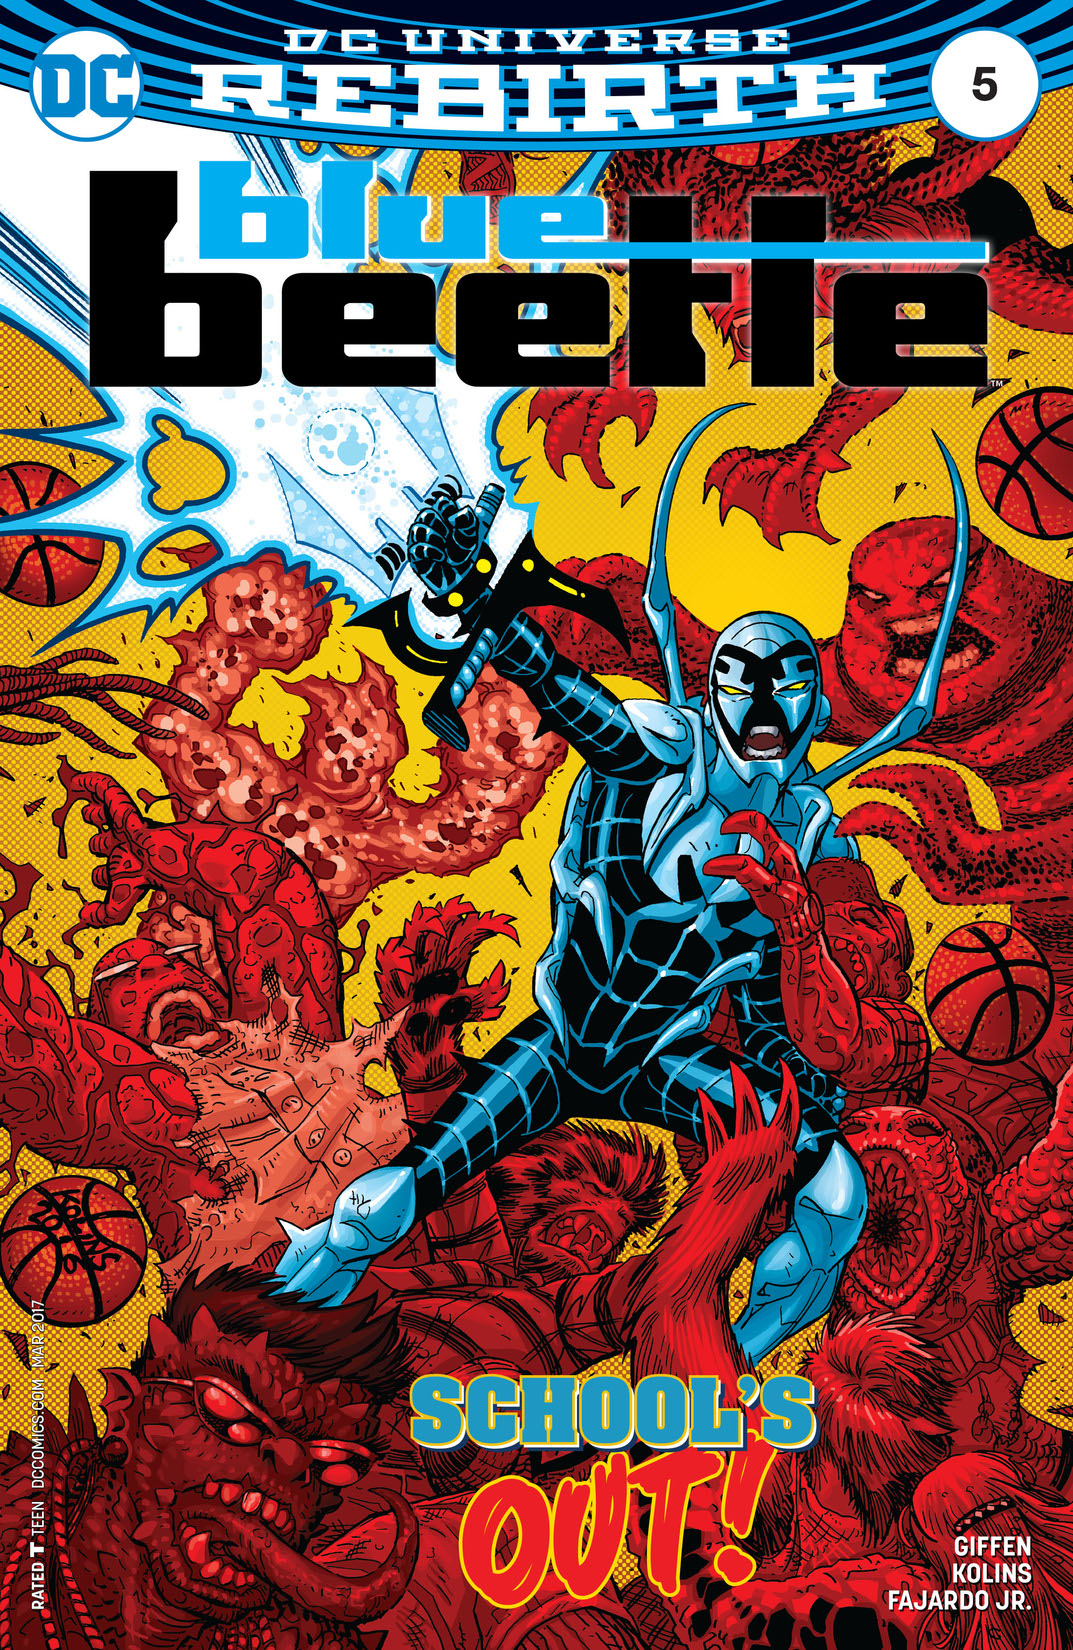 Blue Beetle (2016-) #5 preview images